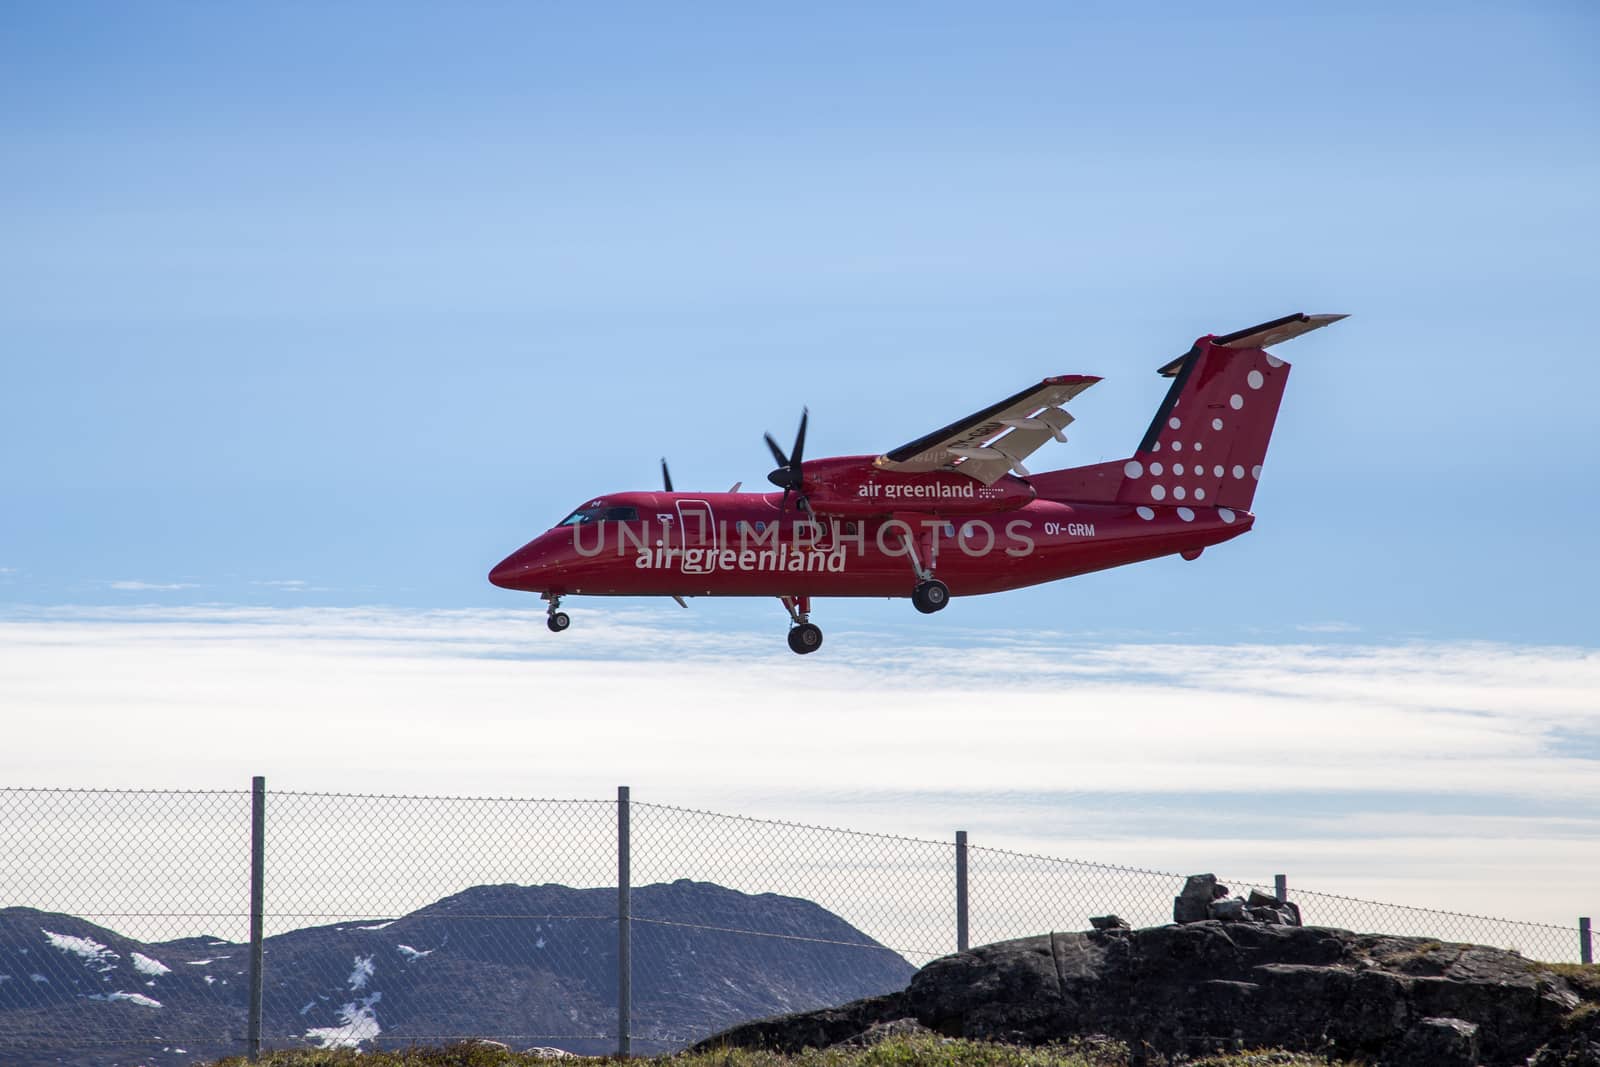 Ilulissat, Greenland - June 30, 2018: A Bombardier Dash 8 Q200 aircraft operated by Air Greenland landing at the airport